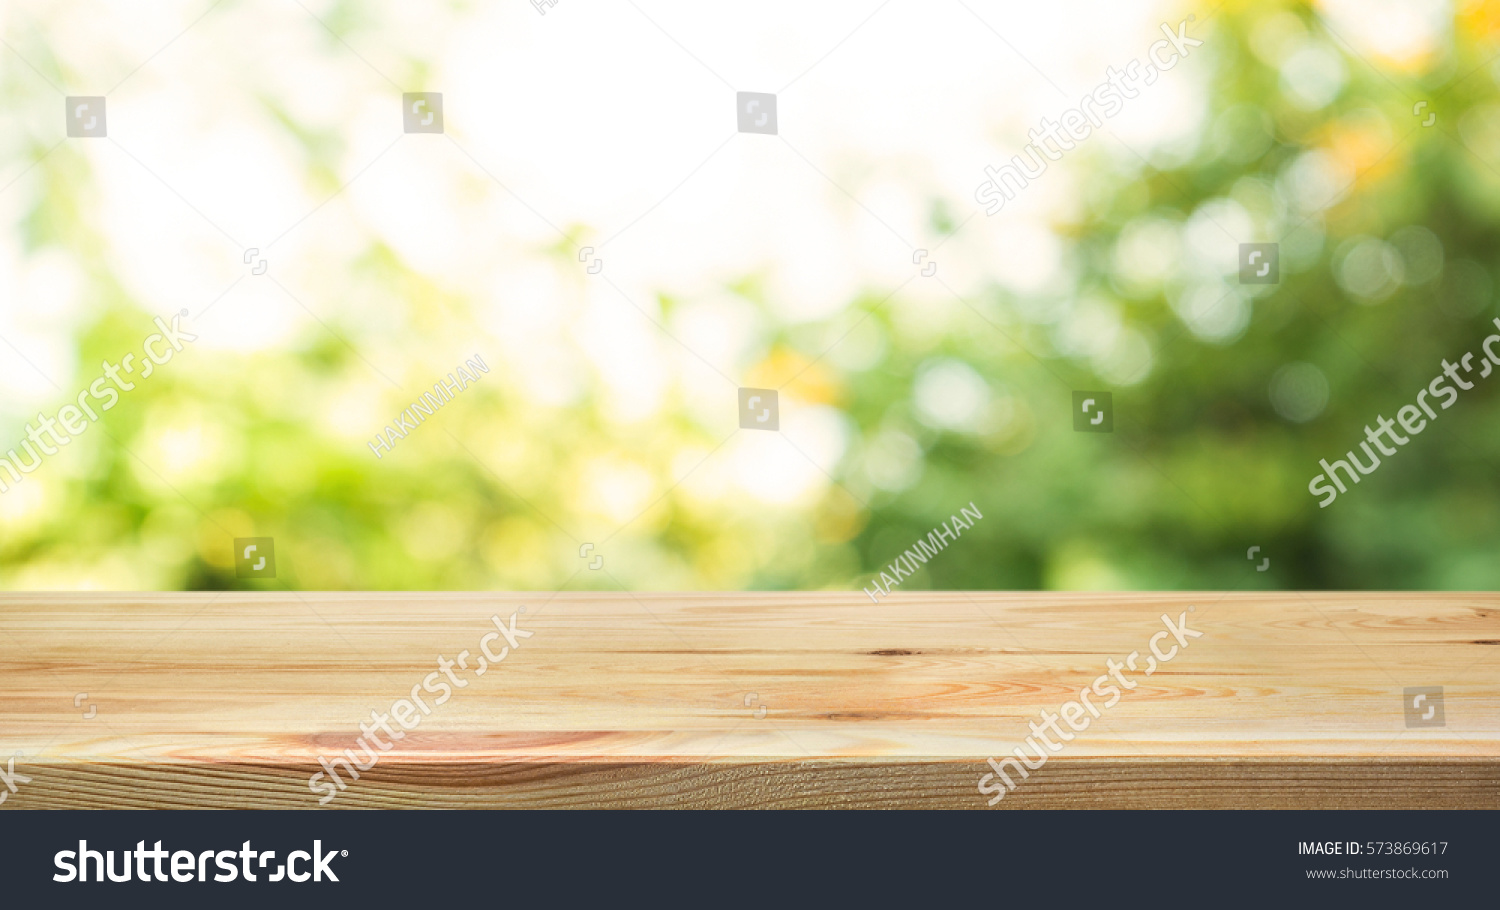 Wood Table Top On Blur Abstract Stock Photo 573869617 | Shutterstock